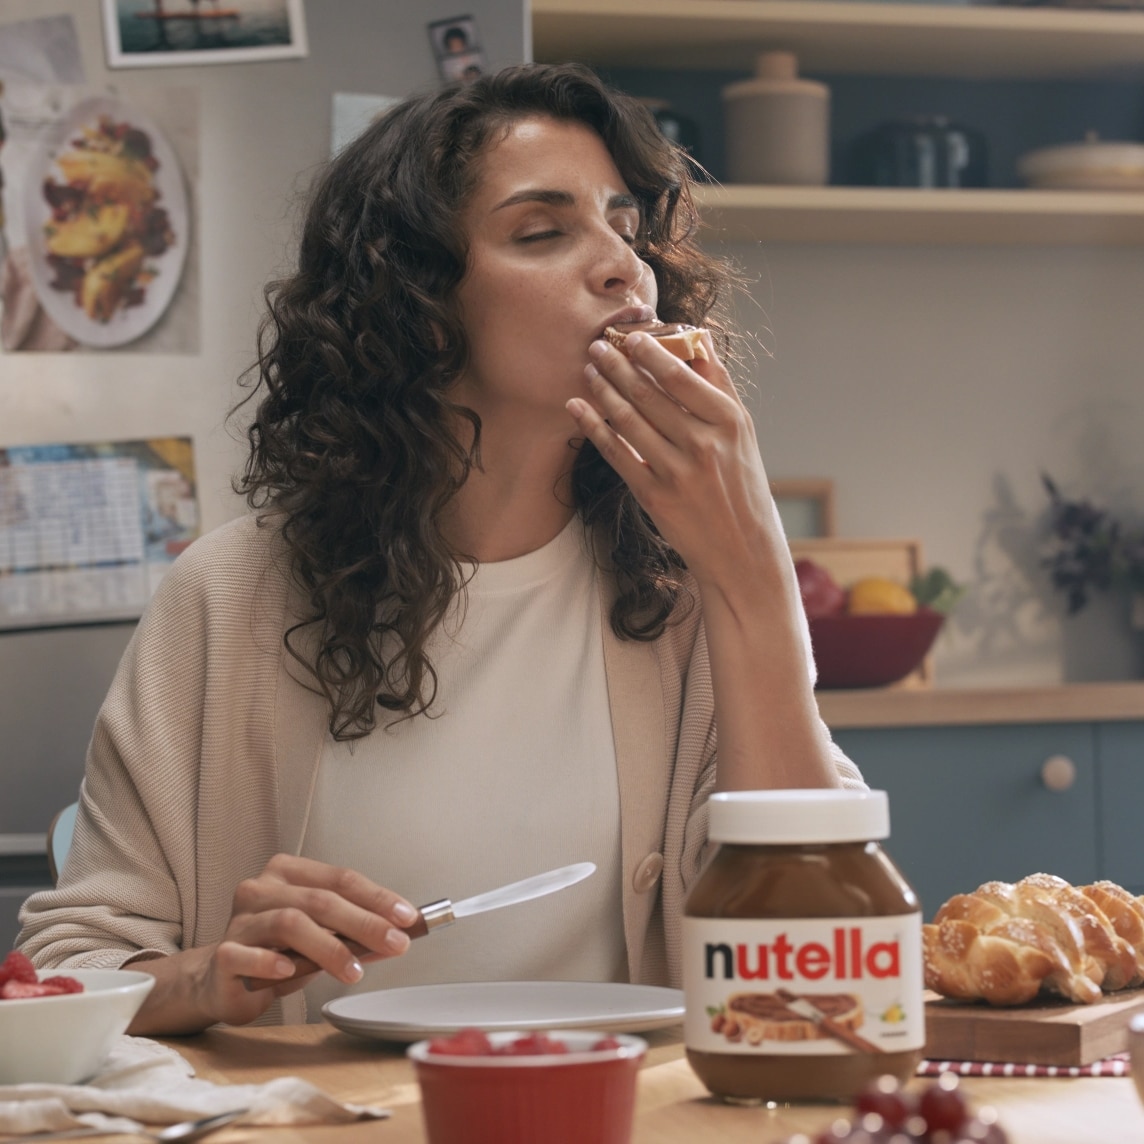 Strike a pose with Nutella®